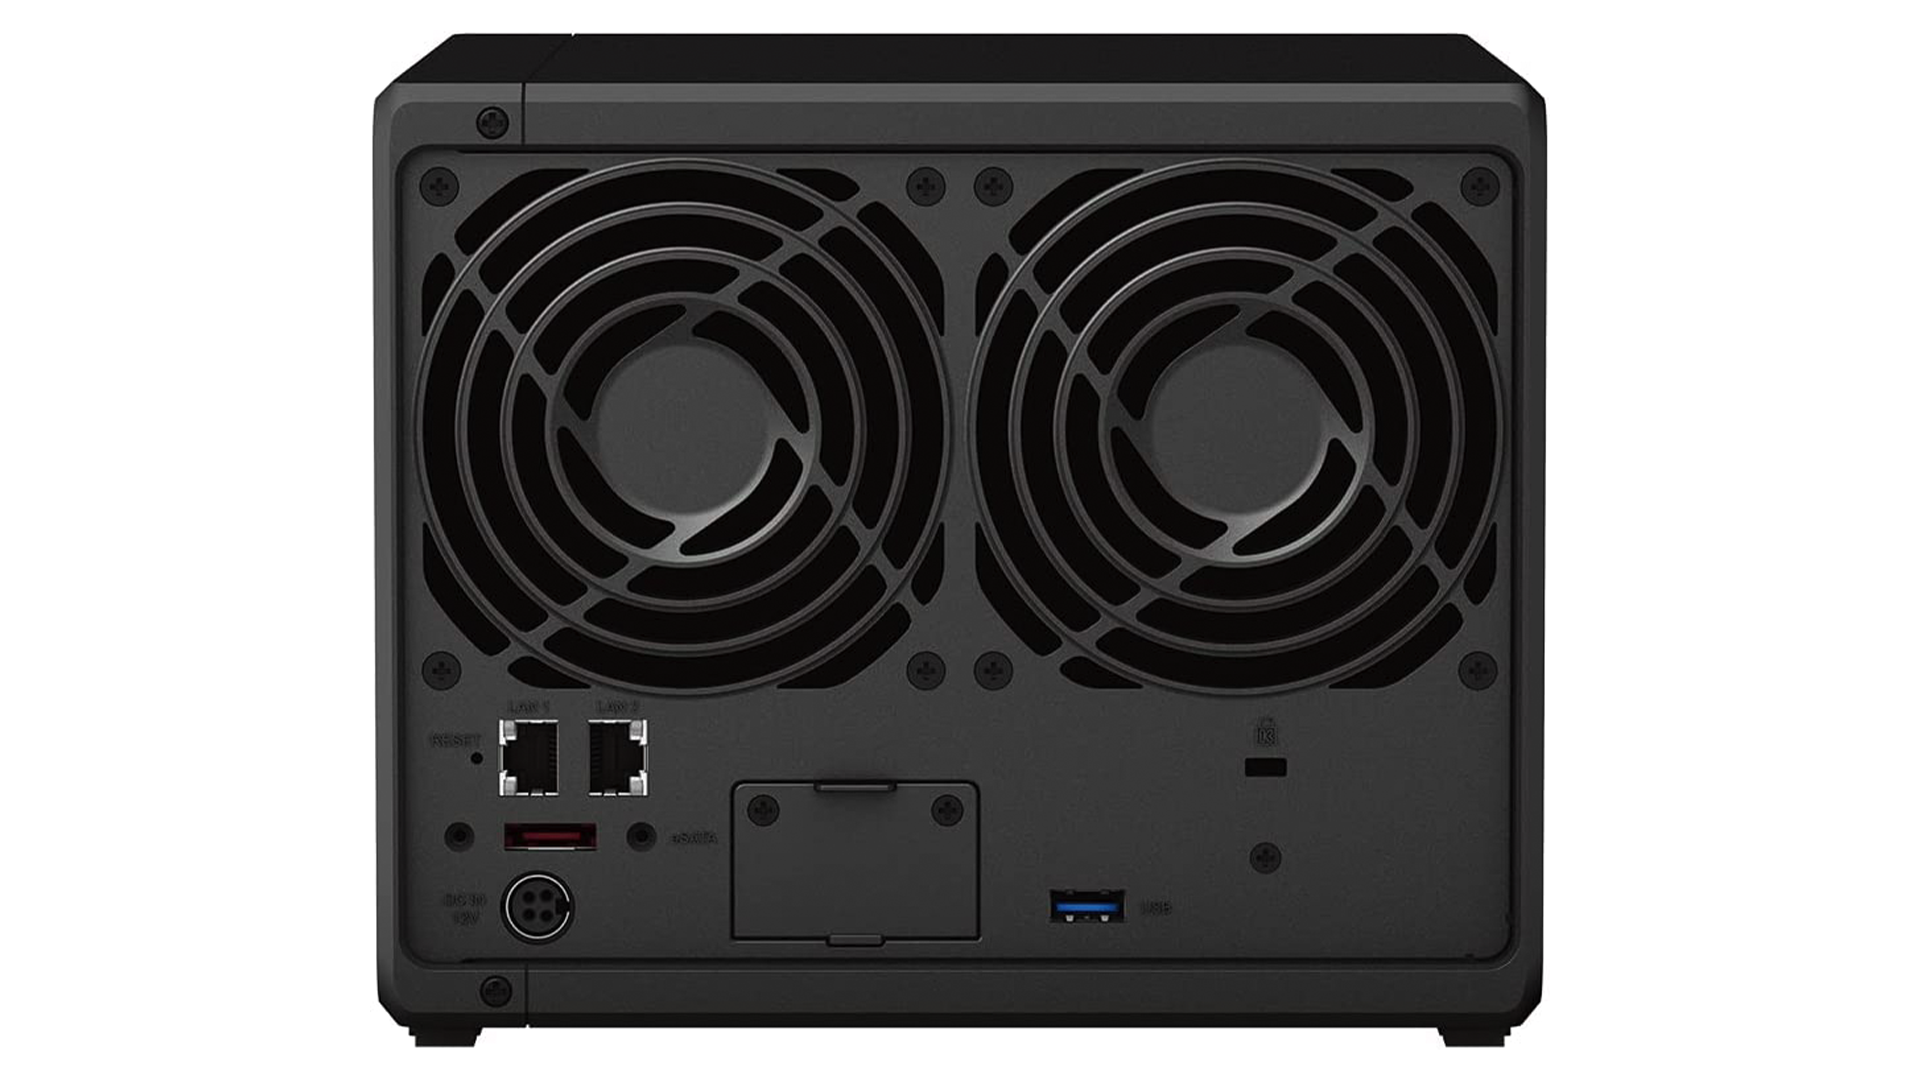 The Synology DiskStation DS923+'s port selection.